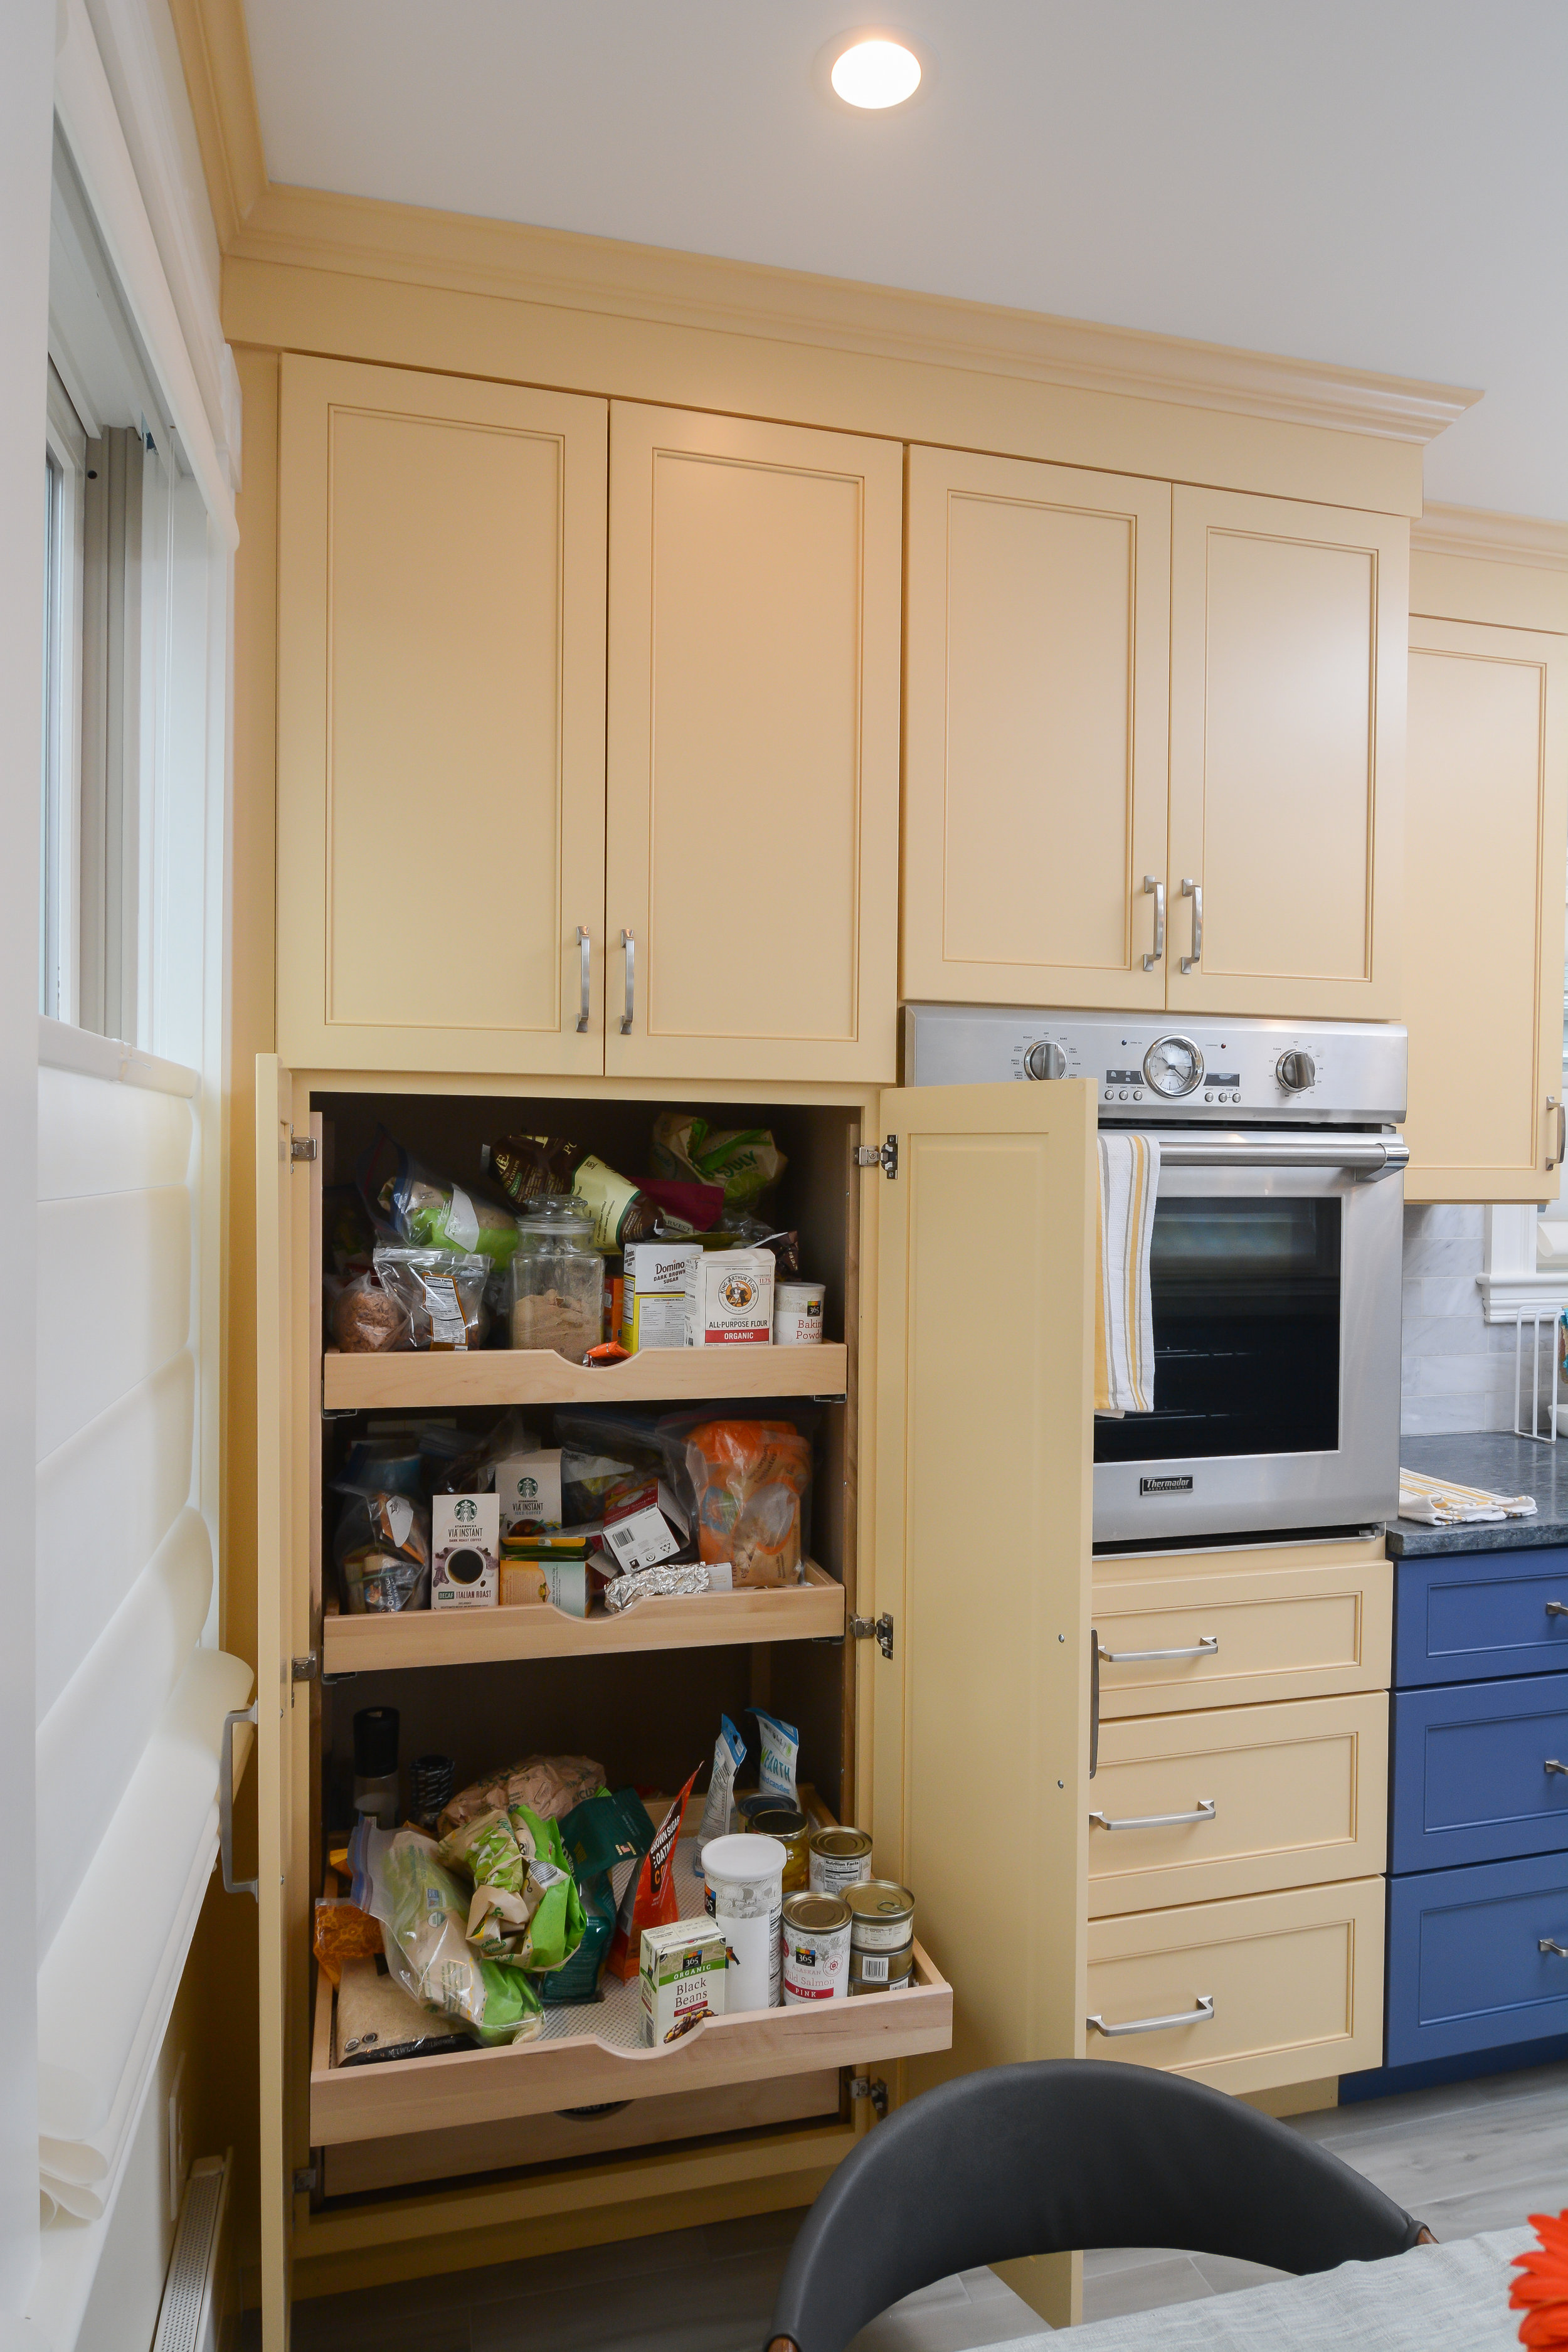 Pantry cabinet has a filler on the left to accommodate windowsill &amp; baseboard heater